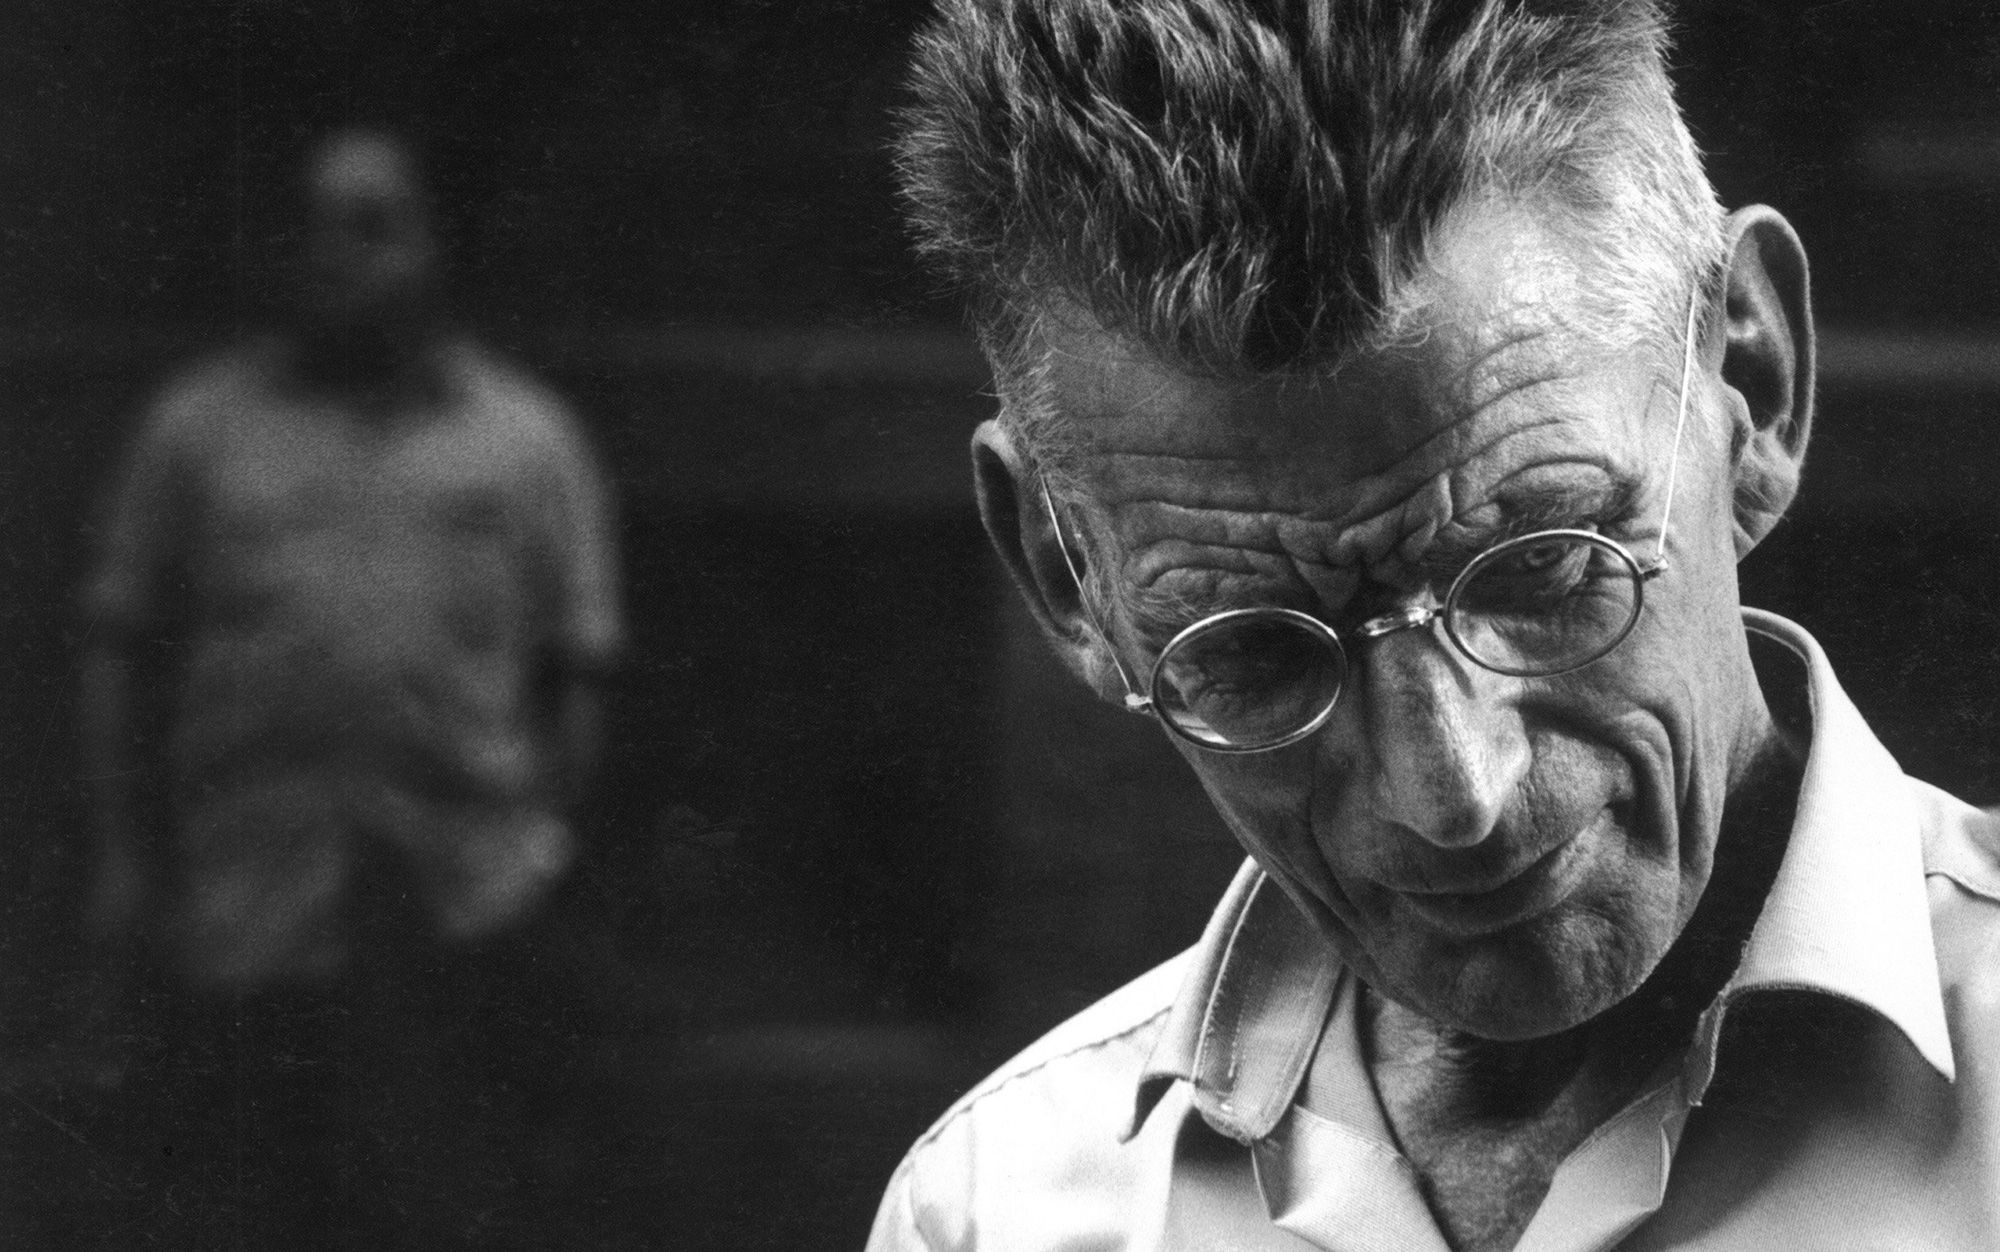 How Samuel Beckett sought salvation in the midst of suffering | Aeon Essays